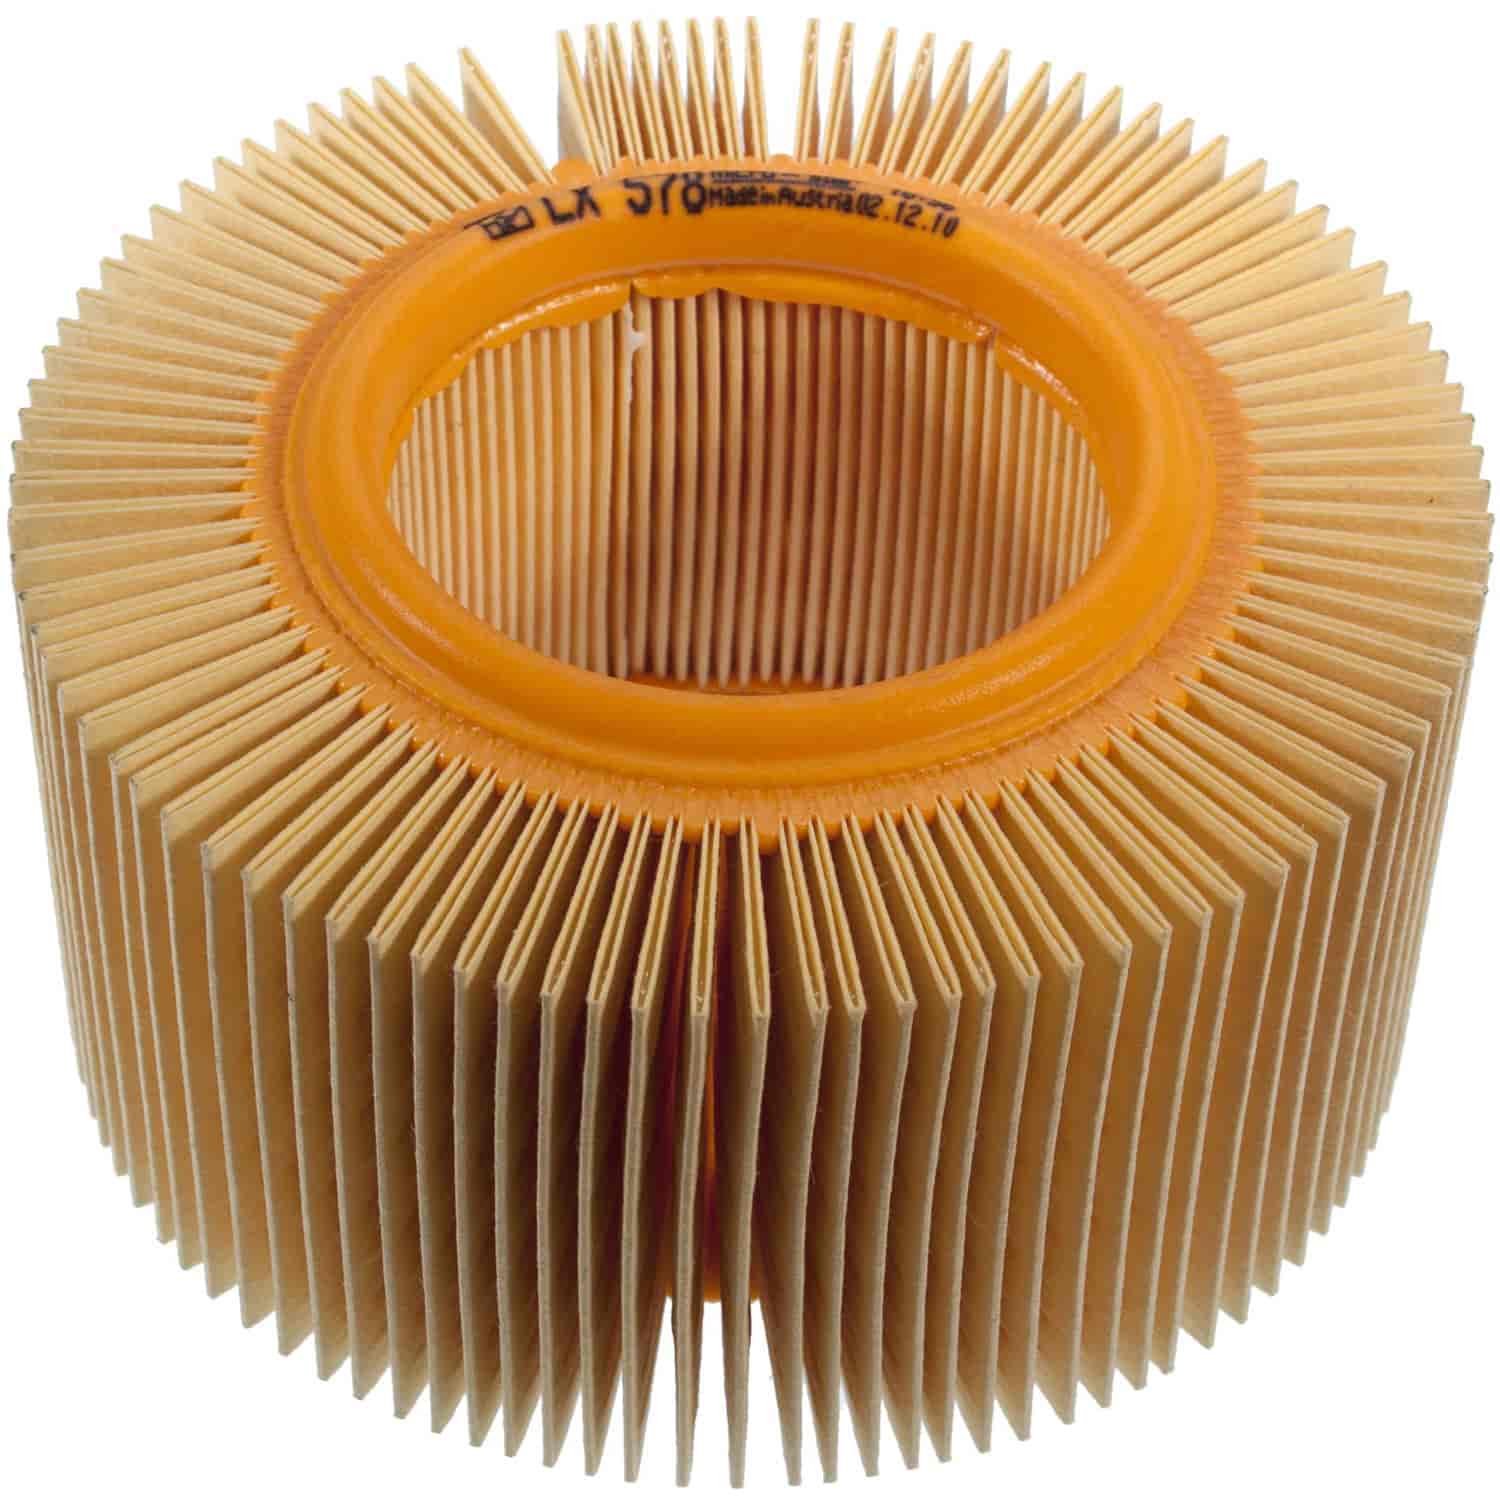 Mahle Air Filter 1993-2006 BMW Motorcycle R-series 848/1092/1130cc